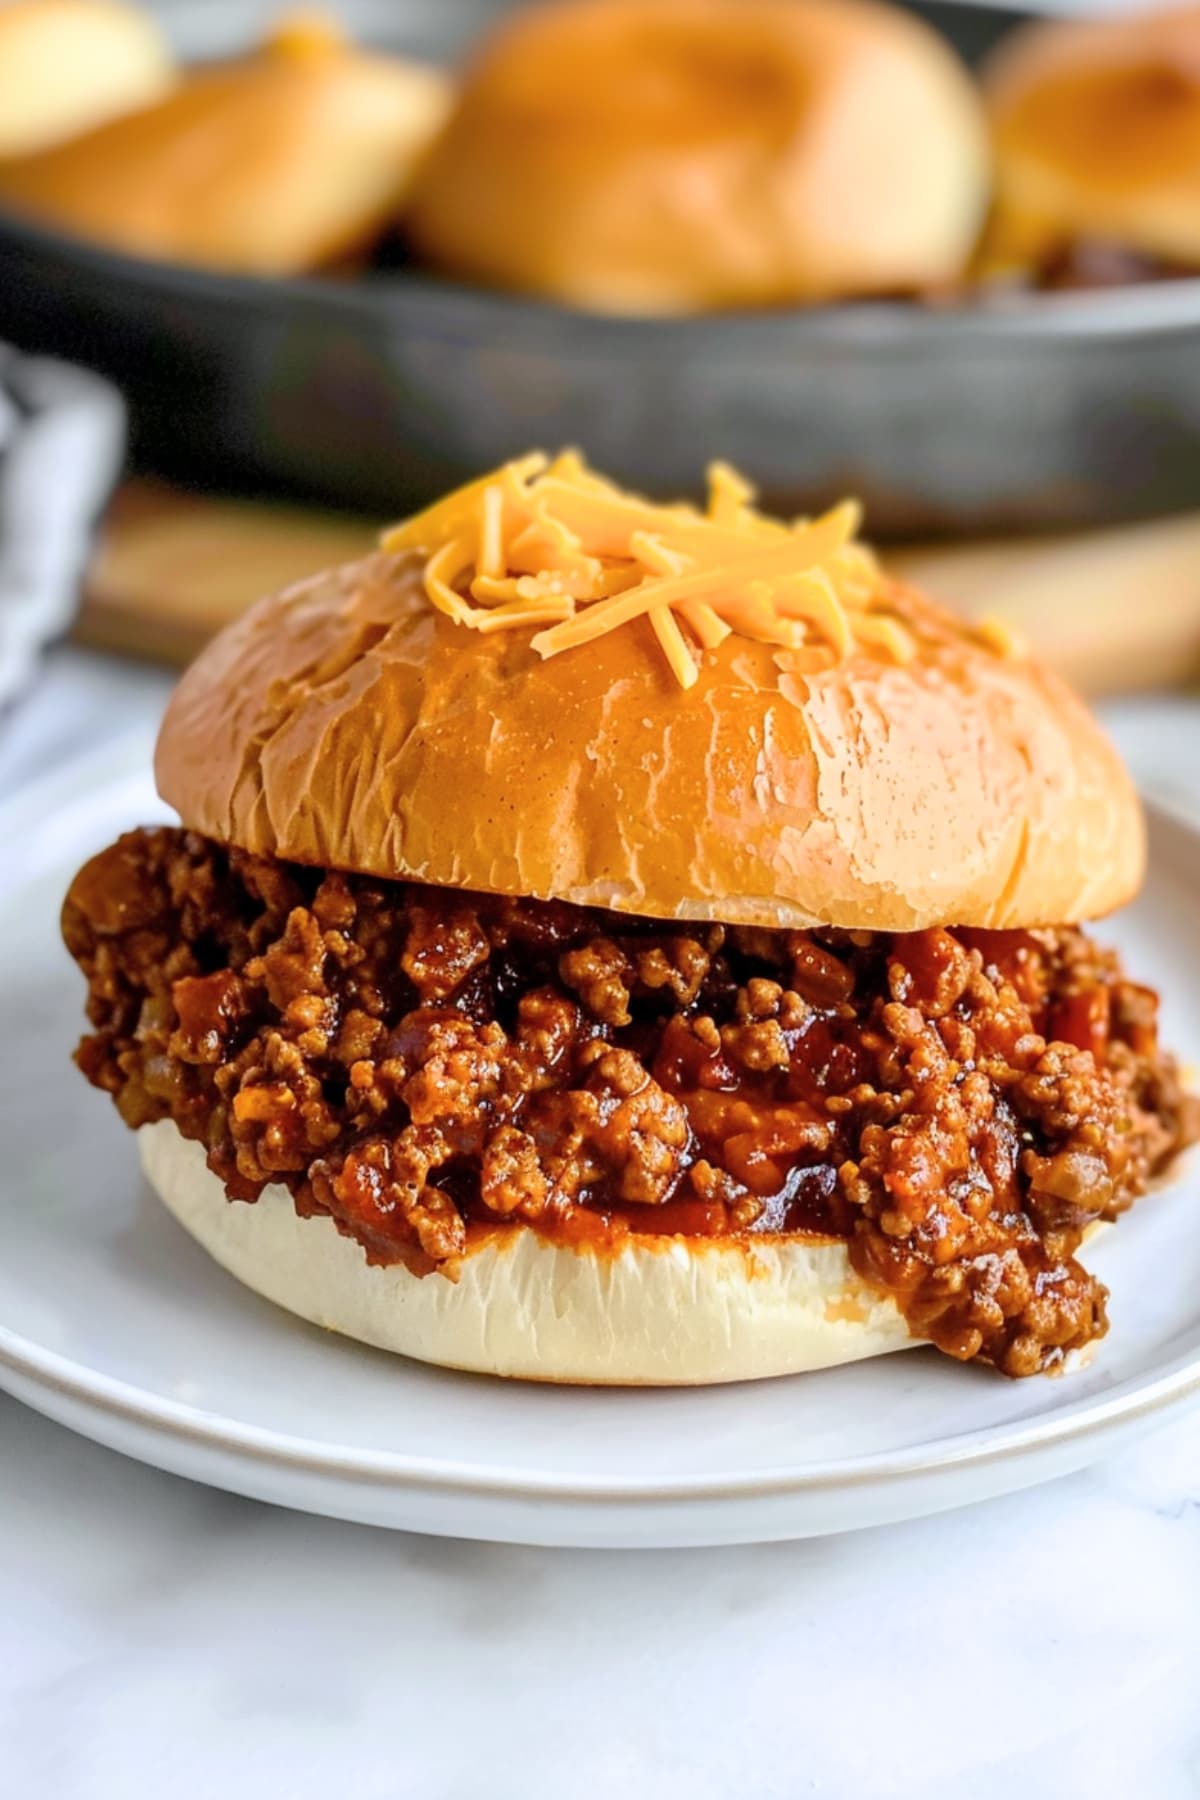 Homemade barbecue sloppy joes with green bell pepper and onions, topped with shredded cheese, bursting with smoky flavor and tangy sauce